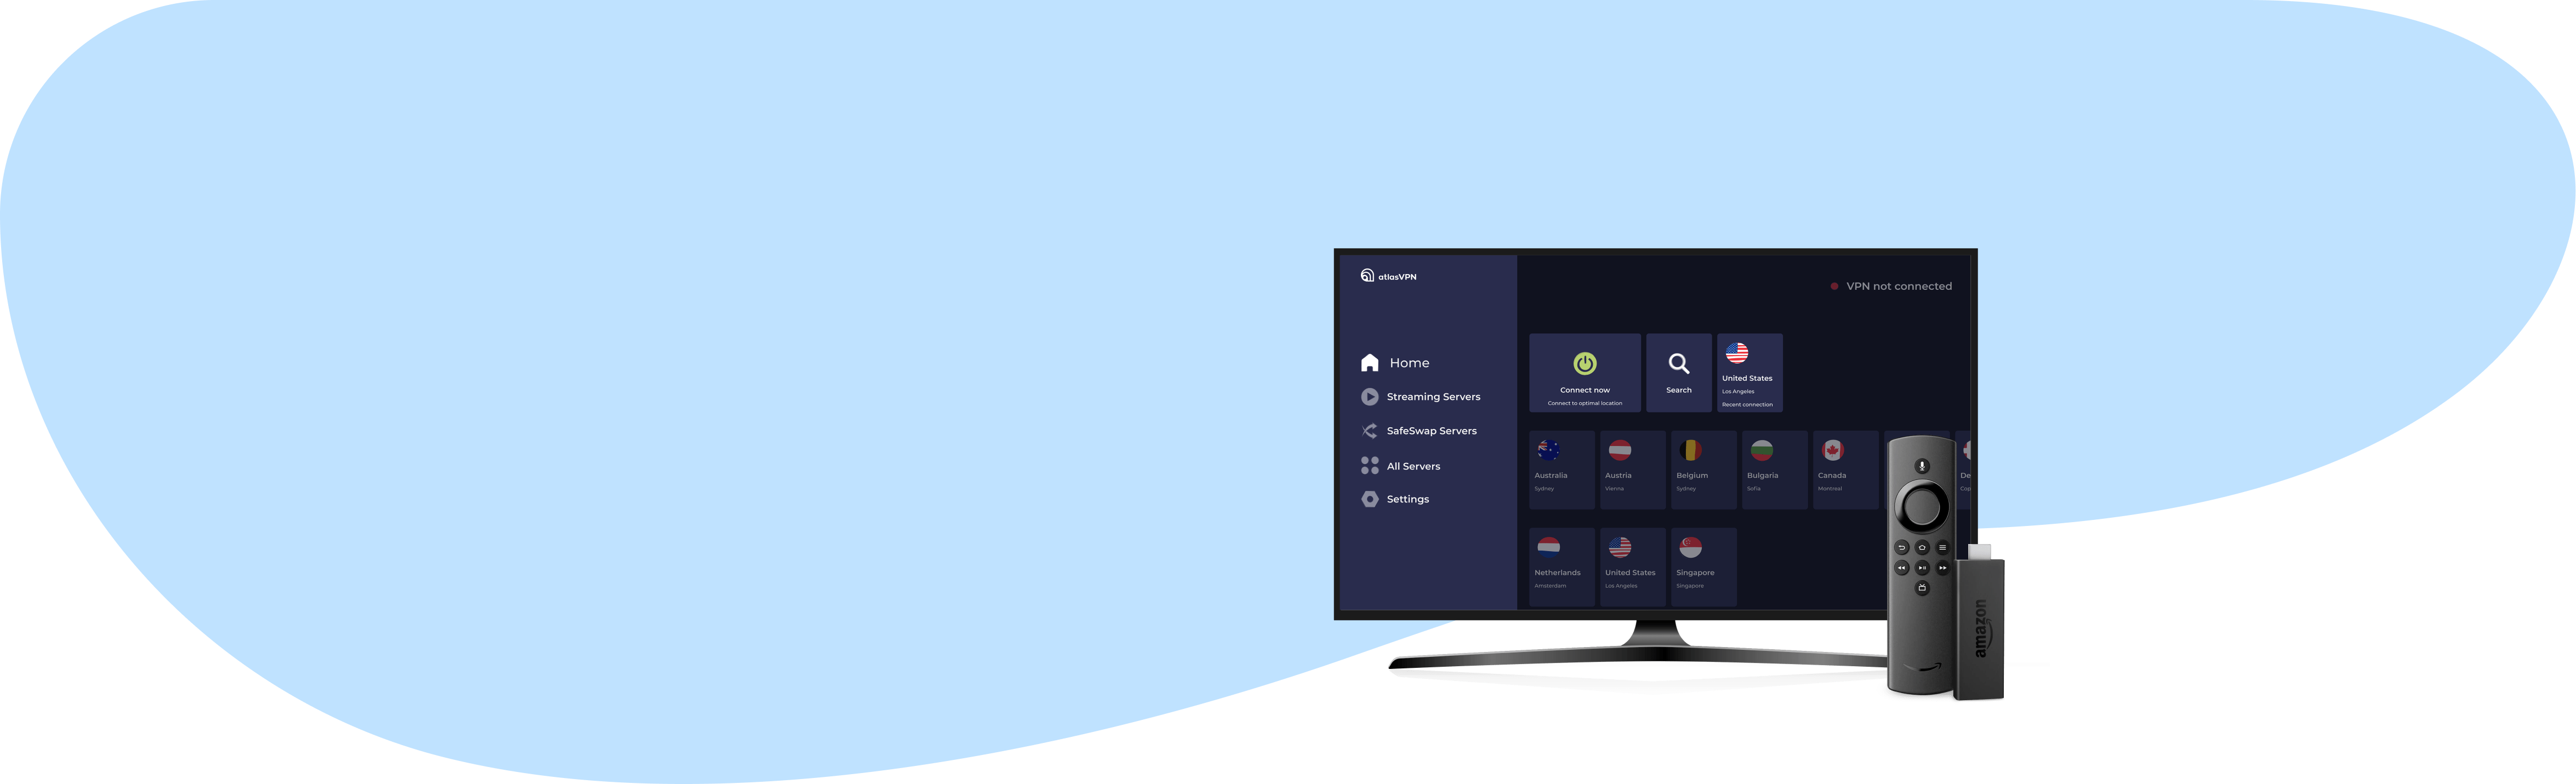 fire tv page header